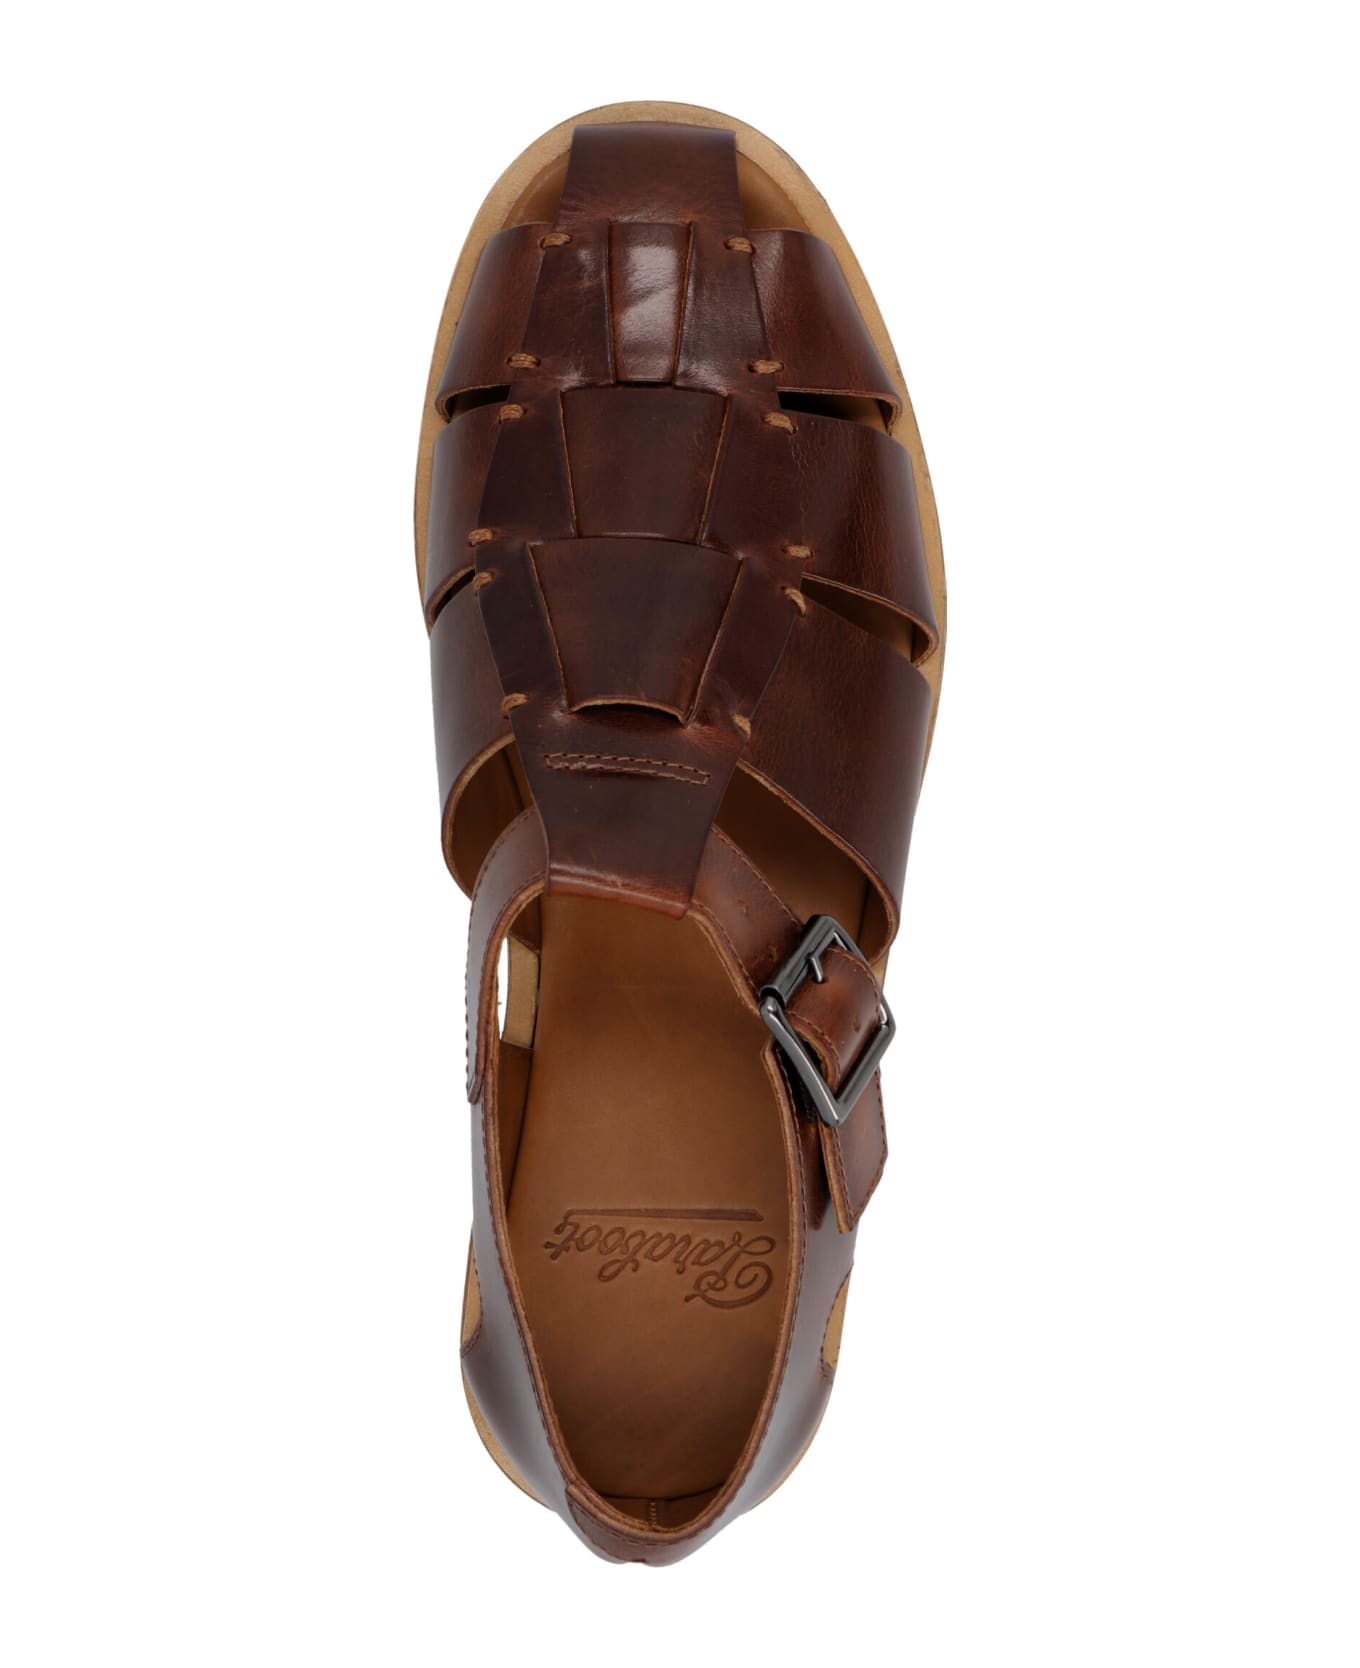 Paraboot 'pacific' Sandals - Brown